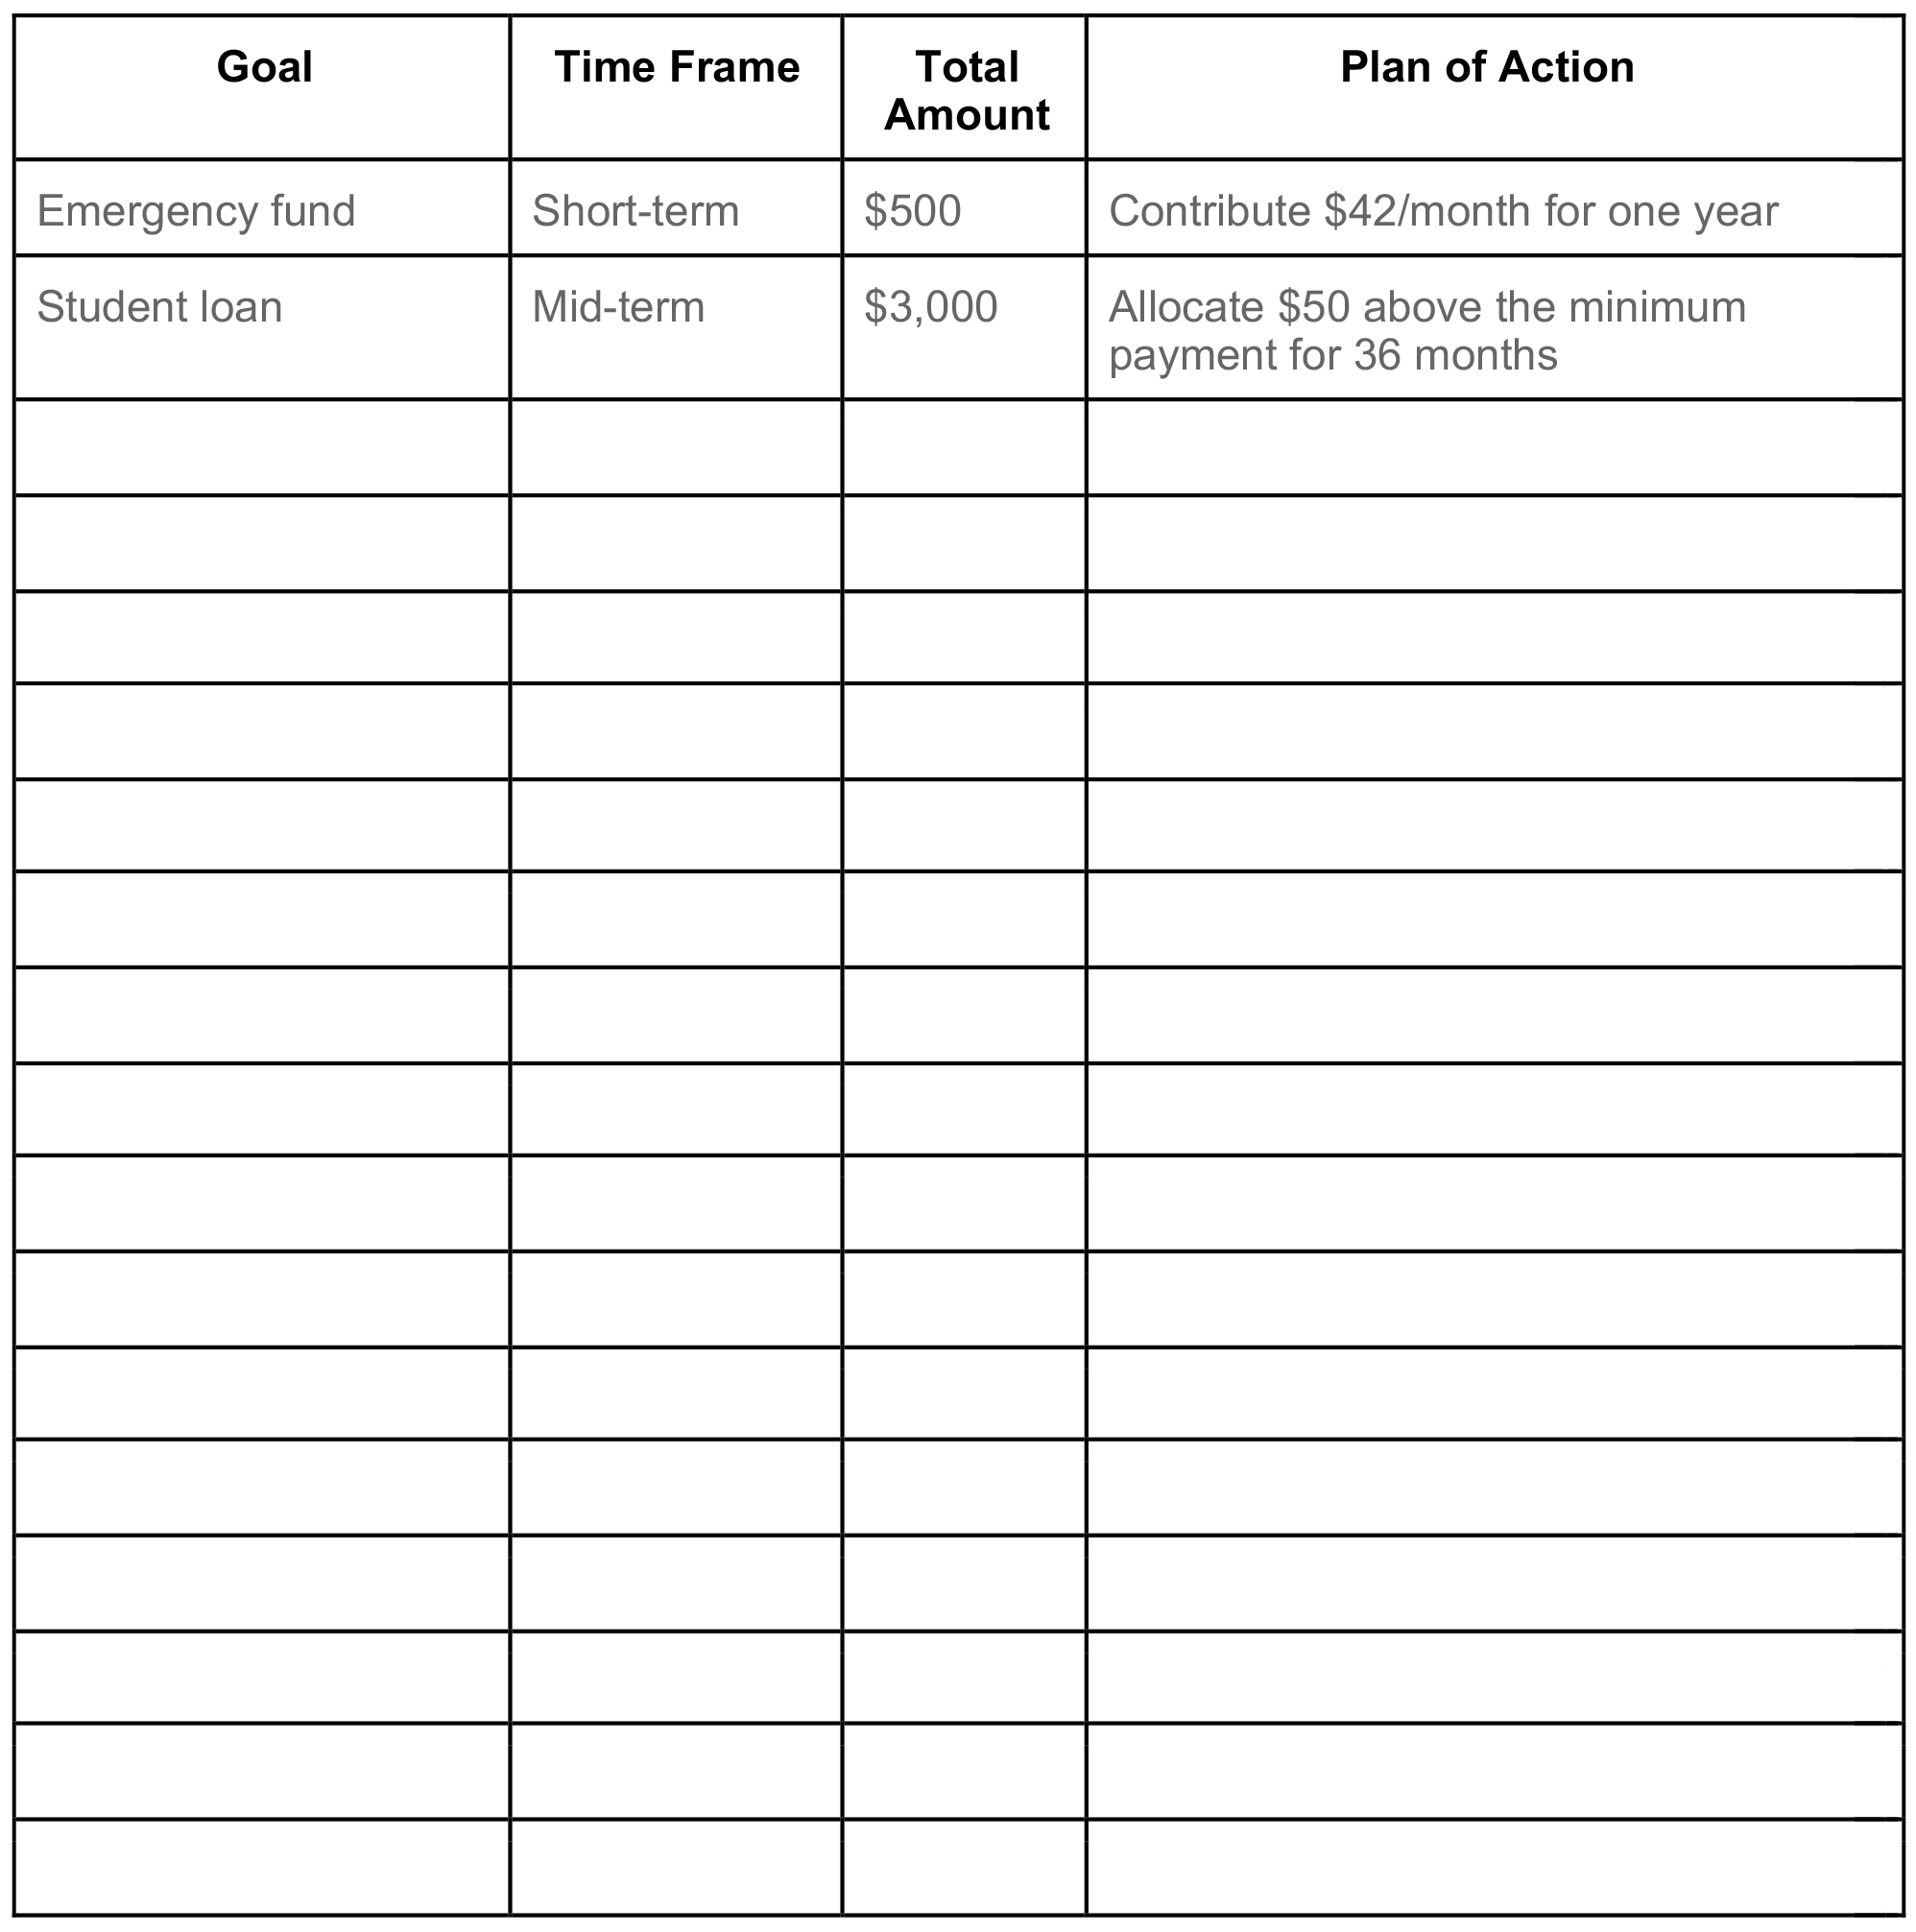 Plan-of-action worksheet for hitting financial goals, including fields for the goal name, the goal type, amount to save, and plan of action to complete each goal